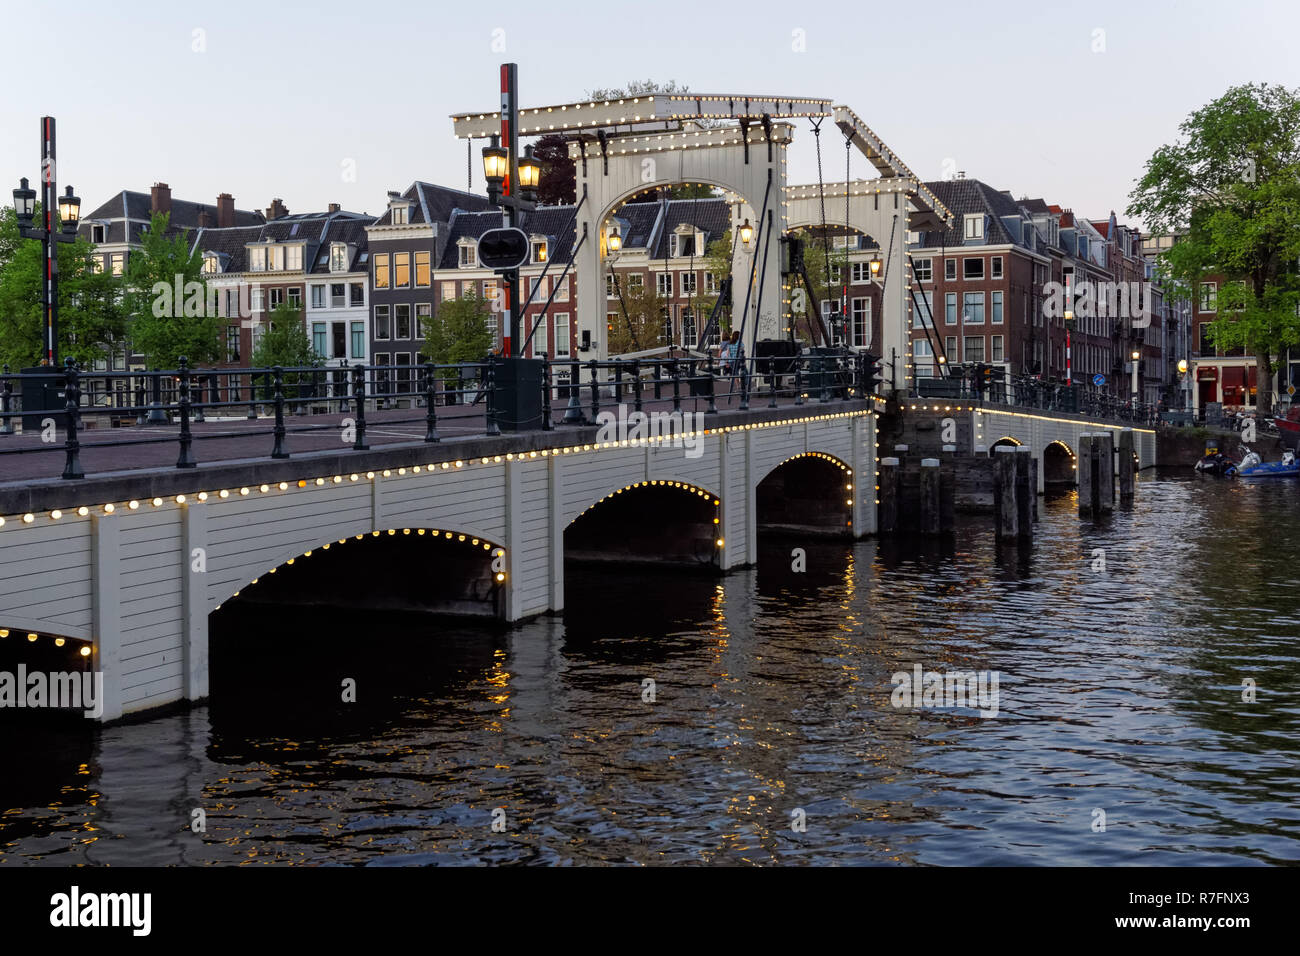 The Magere Brug (Skinny Bridge) over the river Amstel in Amsterdam, Netherlands Stock Photo